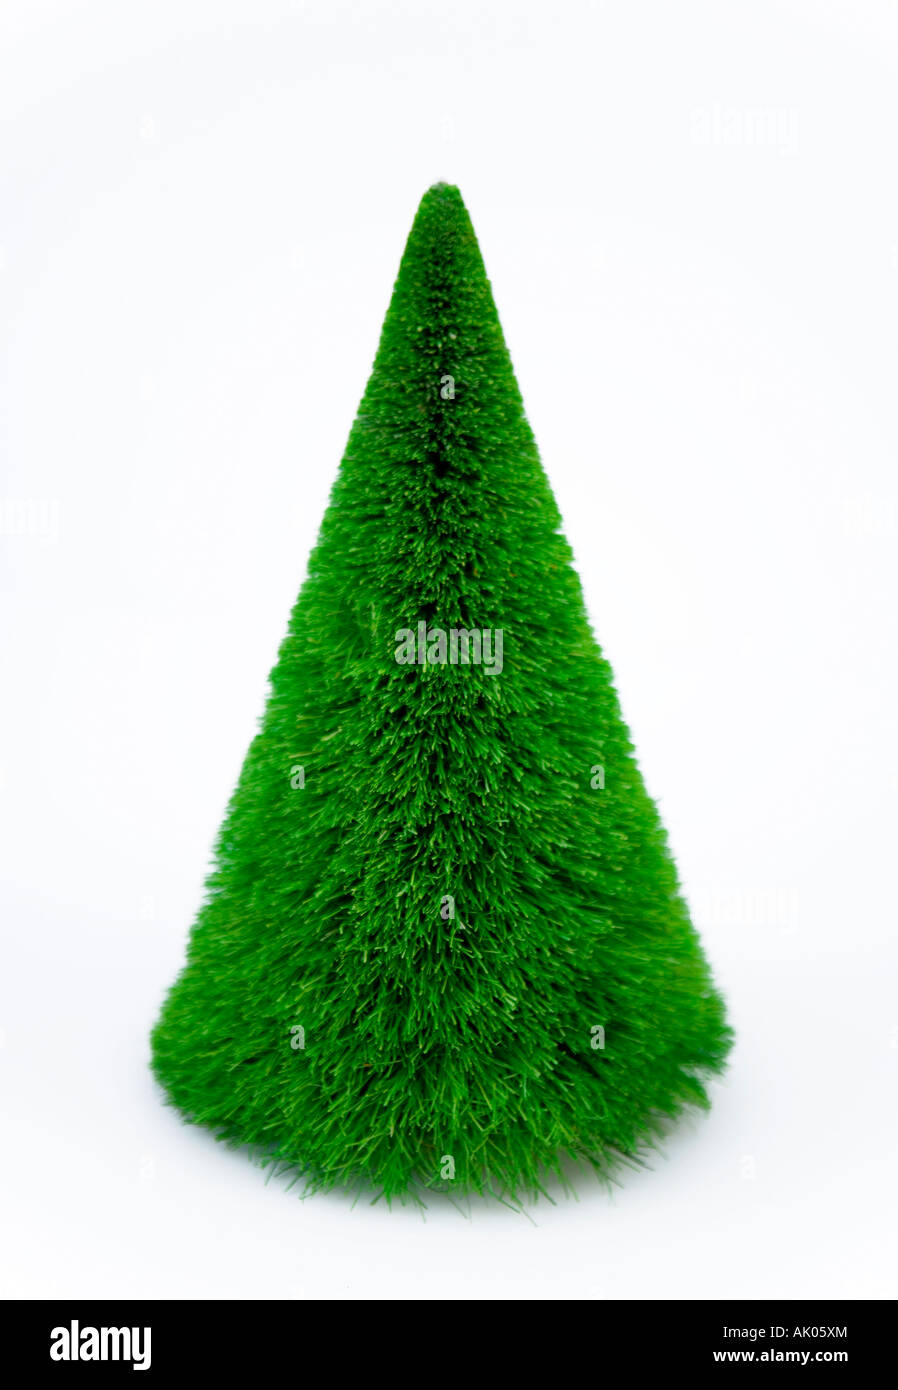 Cone shaped christmas tree Cut Out Stock Images & Pictures - Alamy